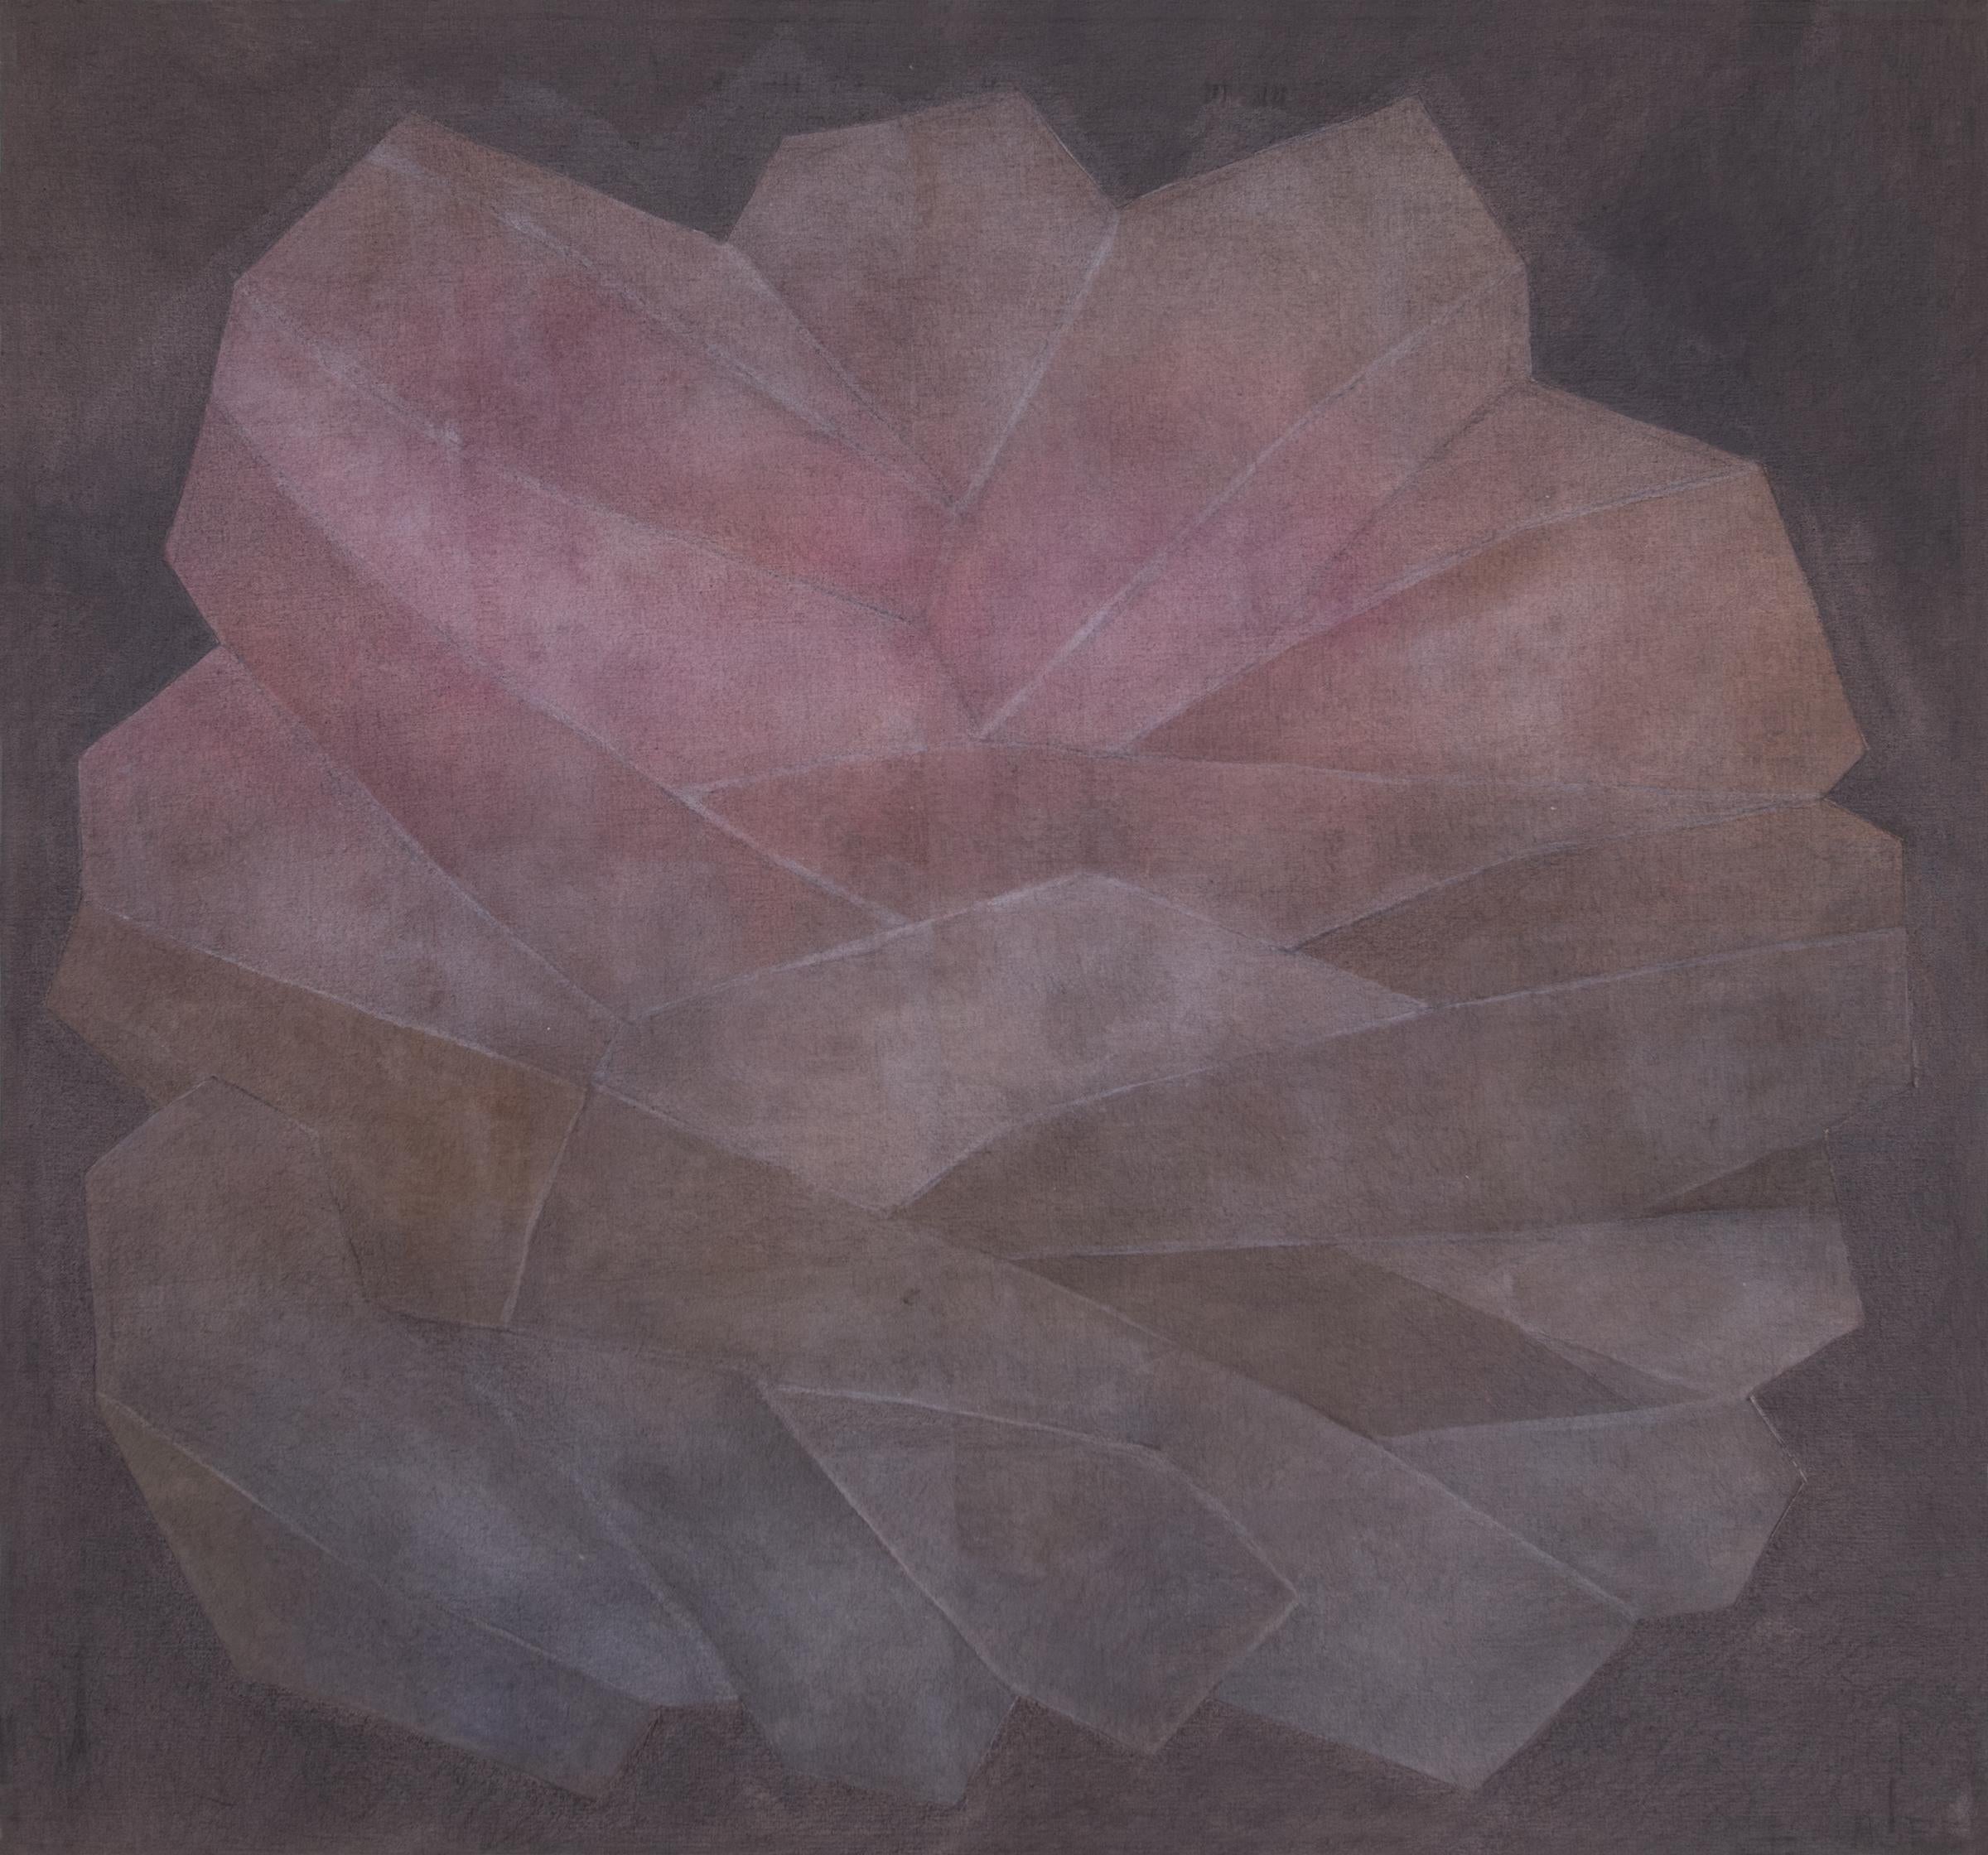 Mid-century modern abstract painting of crystal formations by Margo Hoff (1910-2008) created with acrylic and canvas collage in purple and pink coloring. Wrapped canvas is ready to hang, outer dimensions measure 49 x 49 x 1 ¼ inches. 

Provenance: